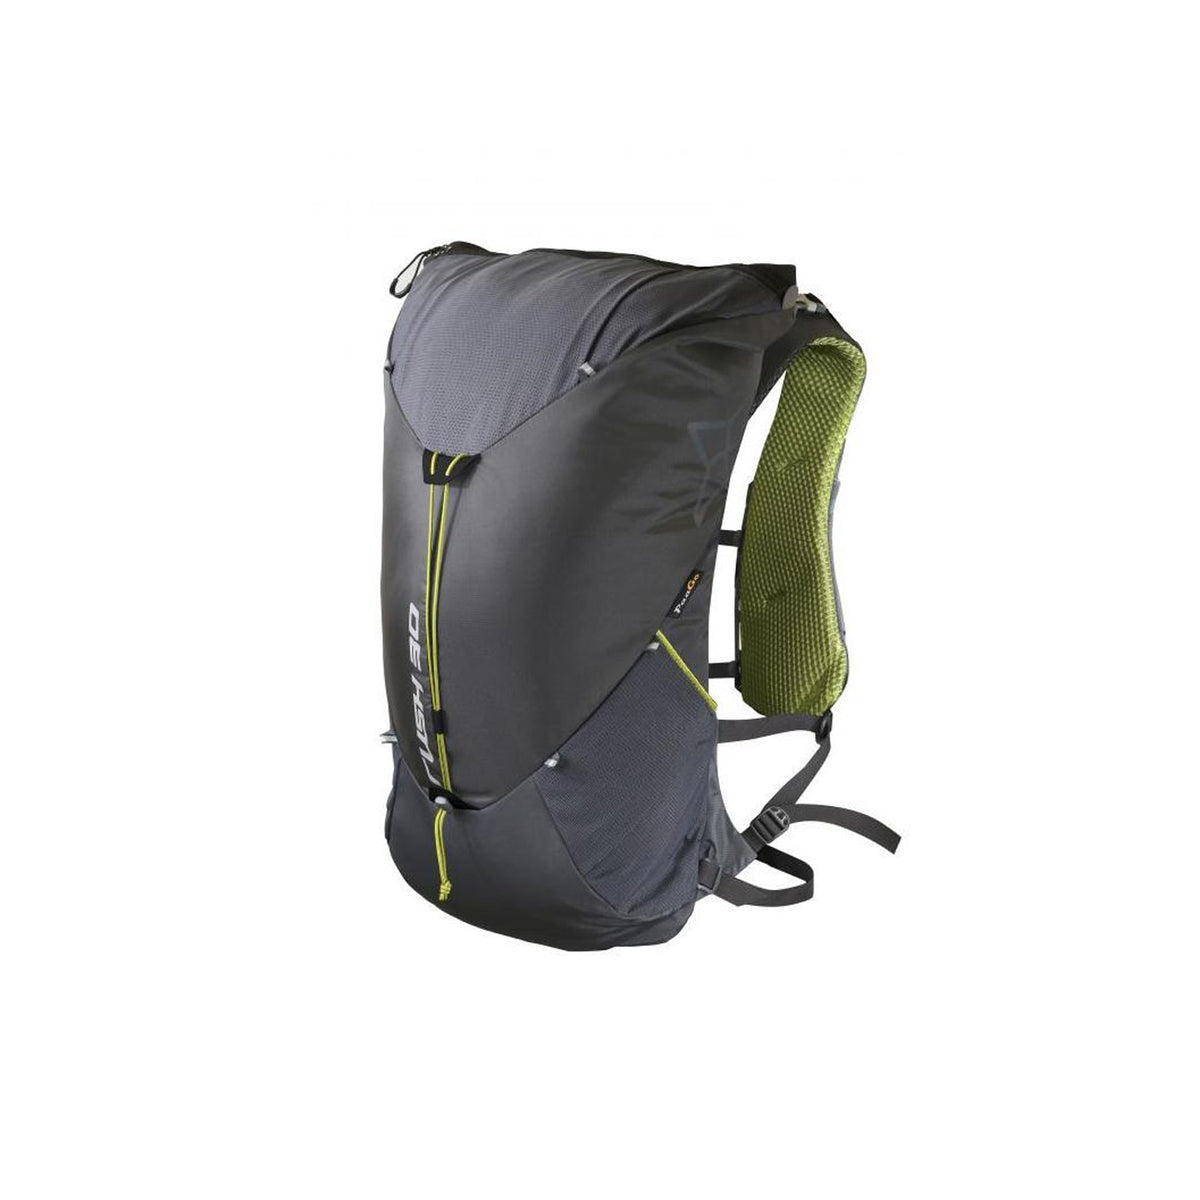 Paago Works - Paago Works Rush 30 - Bags and Packs – Trailhead